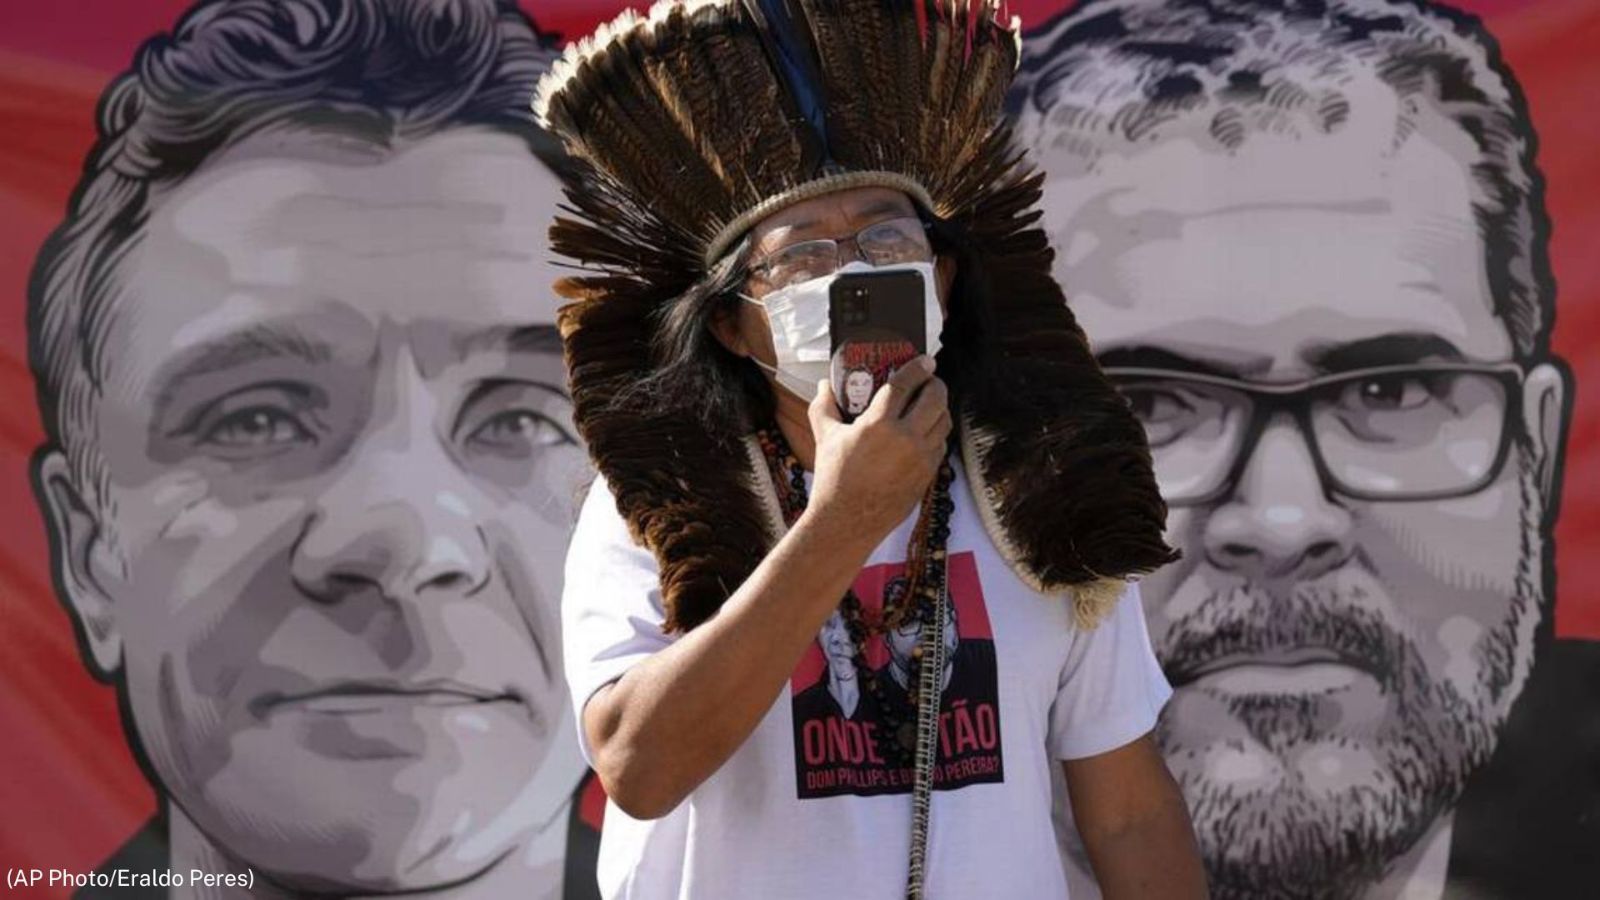 Indigenous leader Kamuu Wapichana stands in front of a banner with images of freelance British journalist Dom Phillips, left, and Brazilian Indigenous expert Bruno Pereira. [AP Photo by Eraldo Peres]